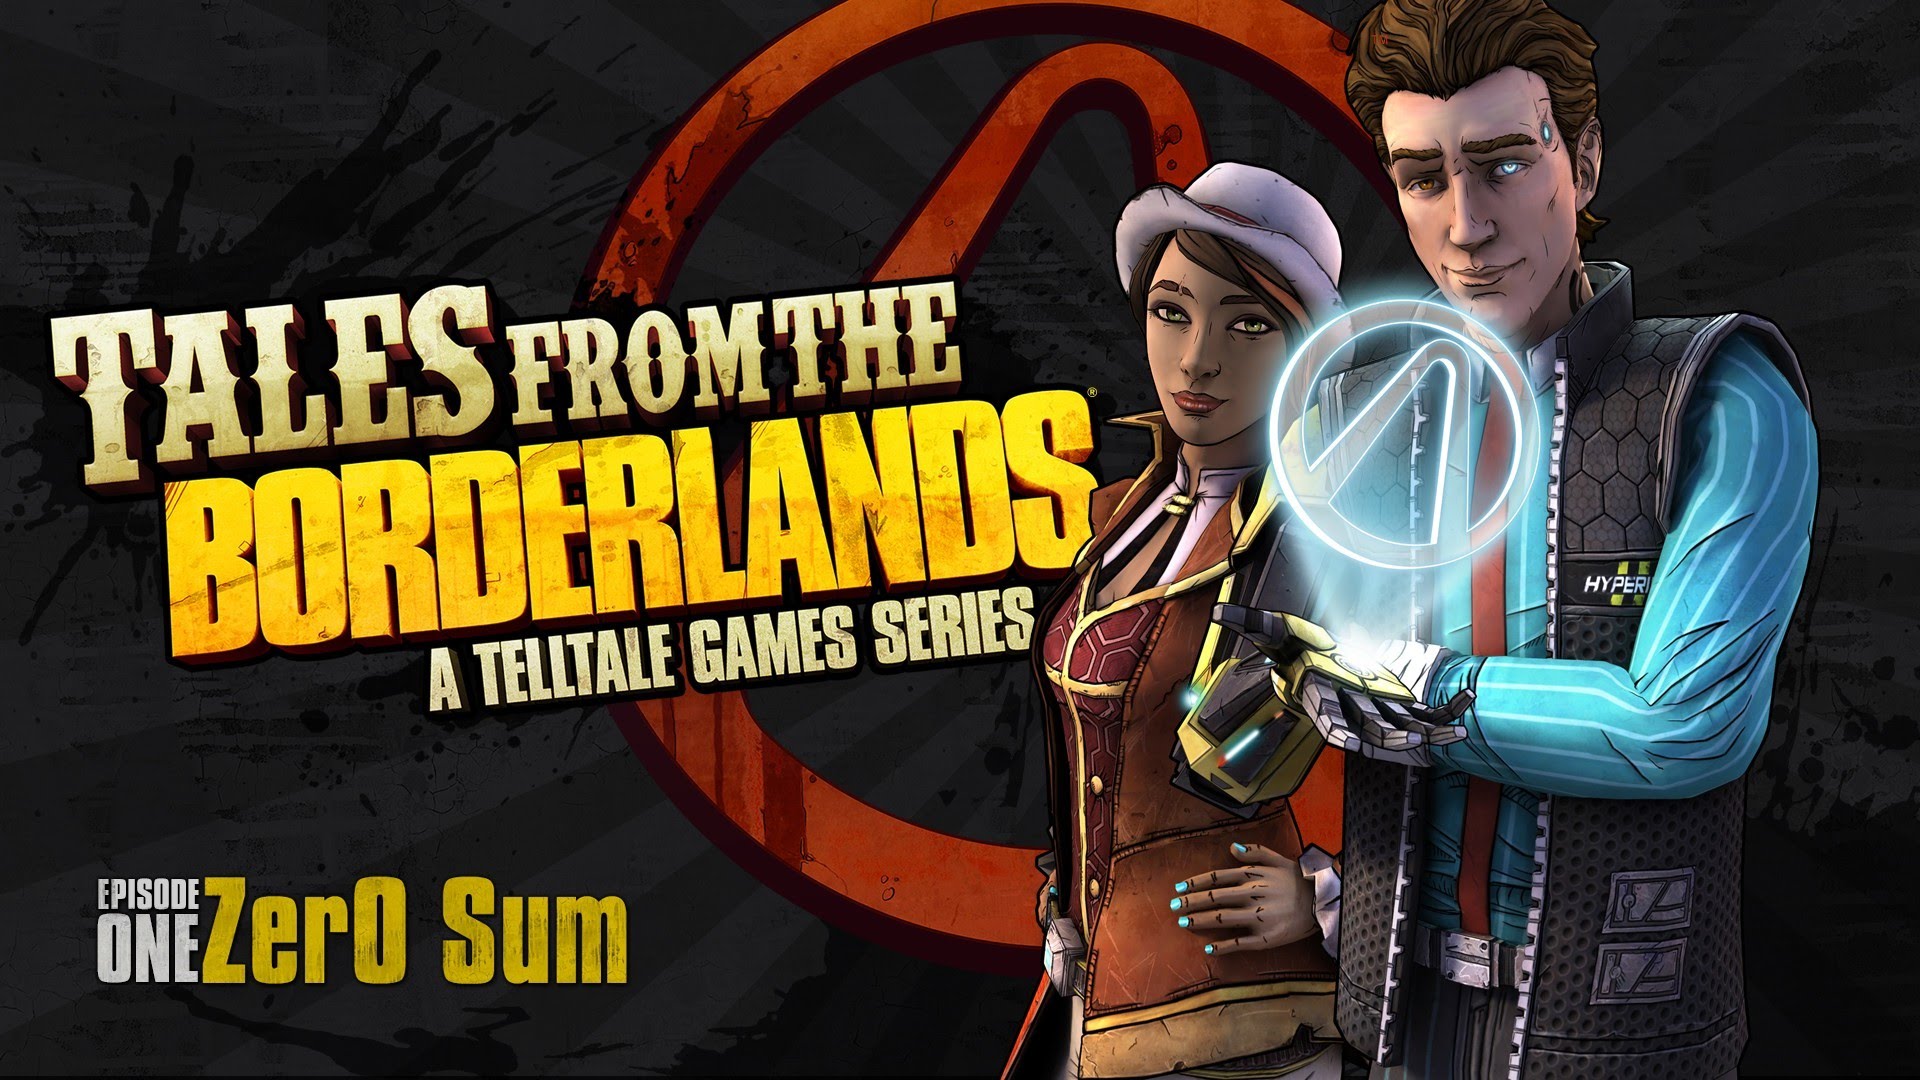 Tales from the Borderlands Ep1 No Comments unpopular choices Full Playthrough | Zer0 Sum